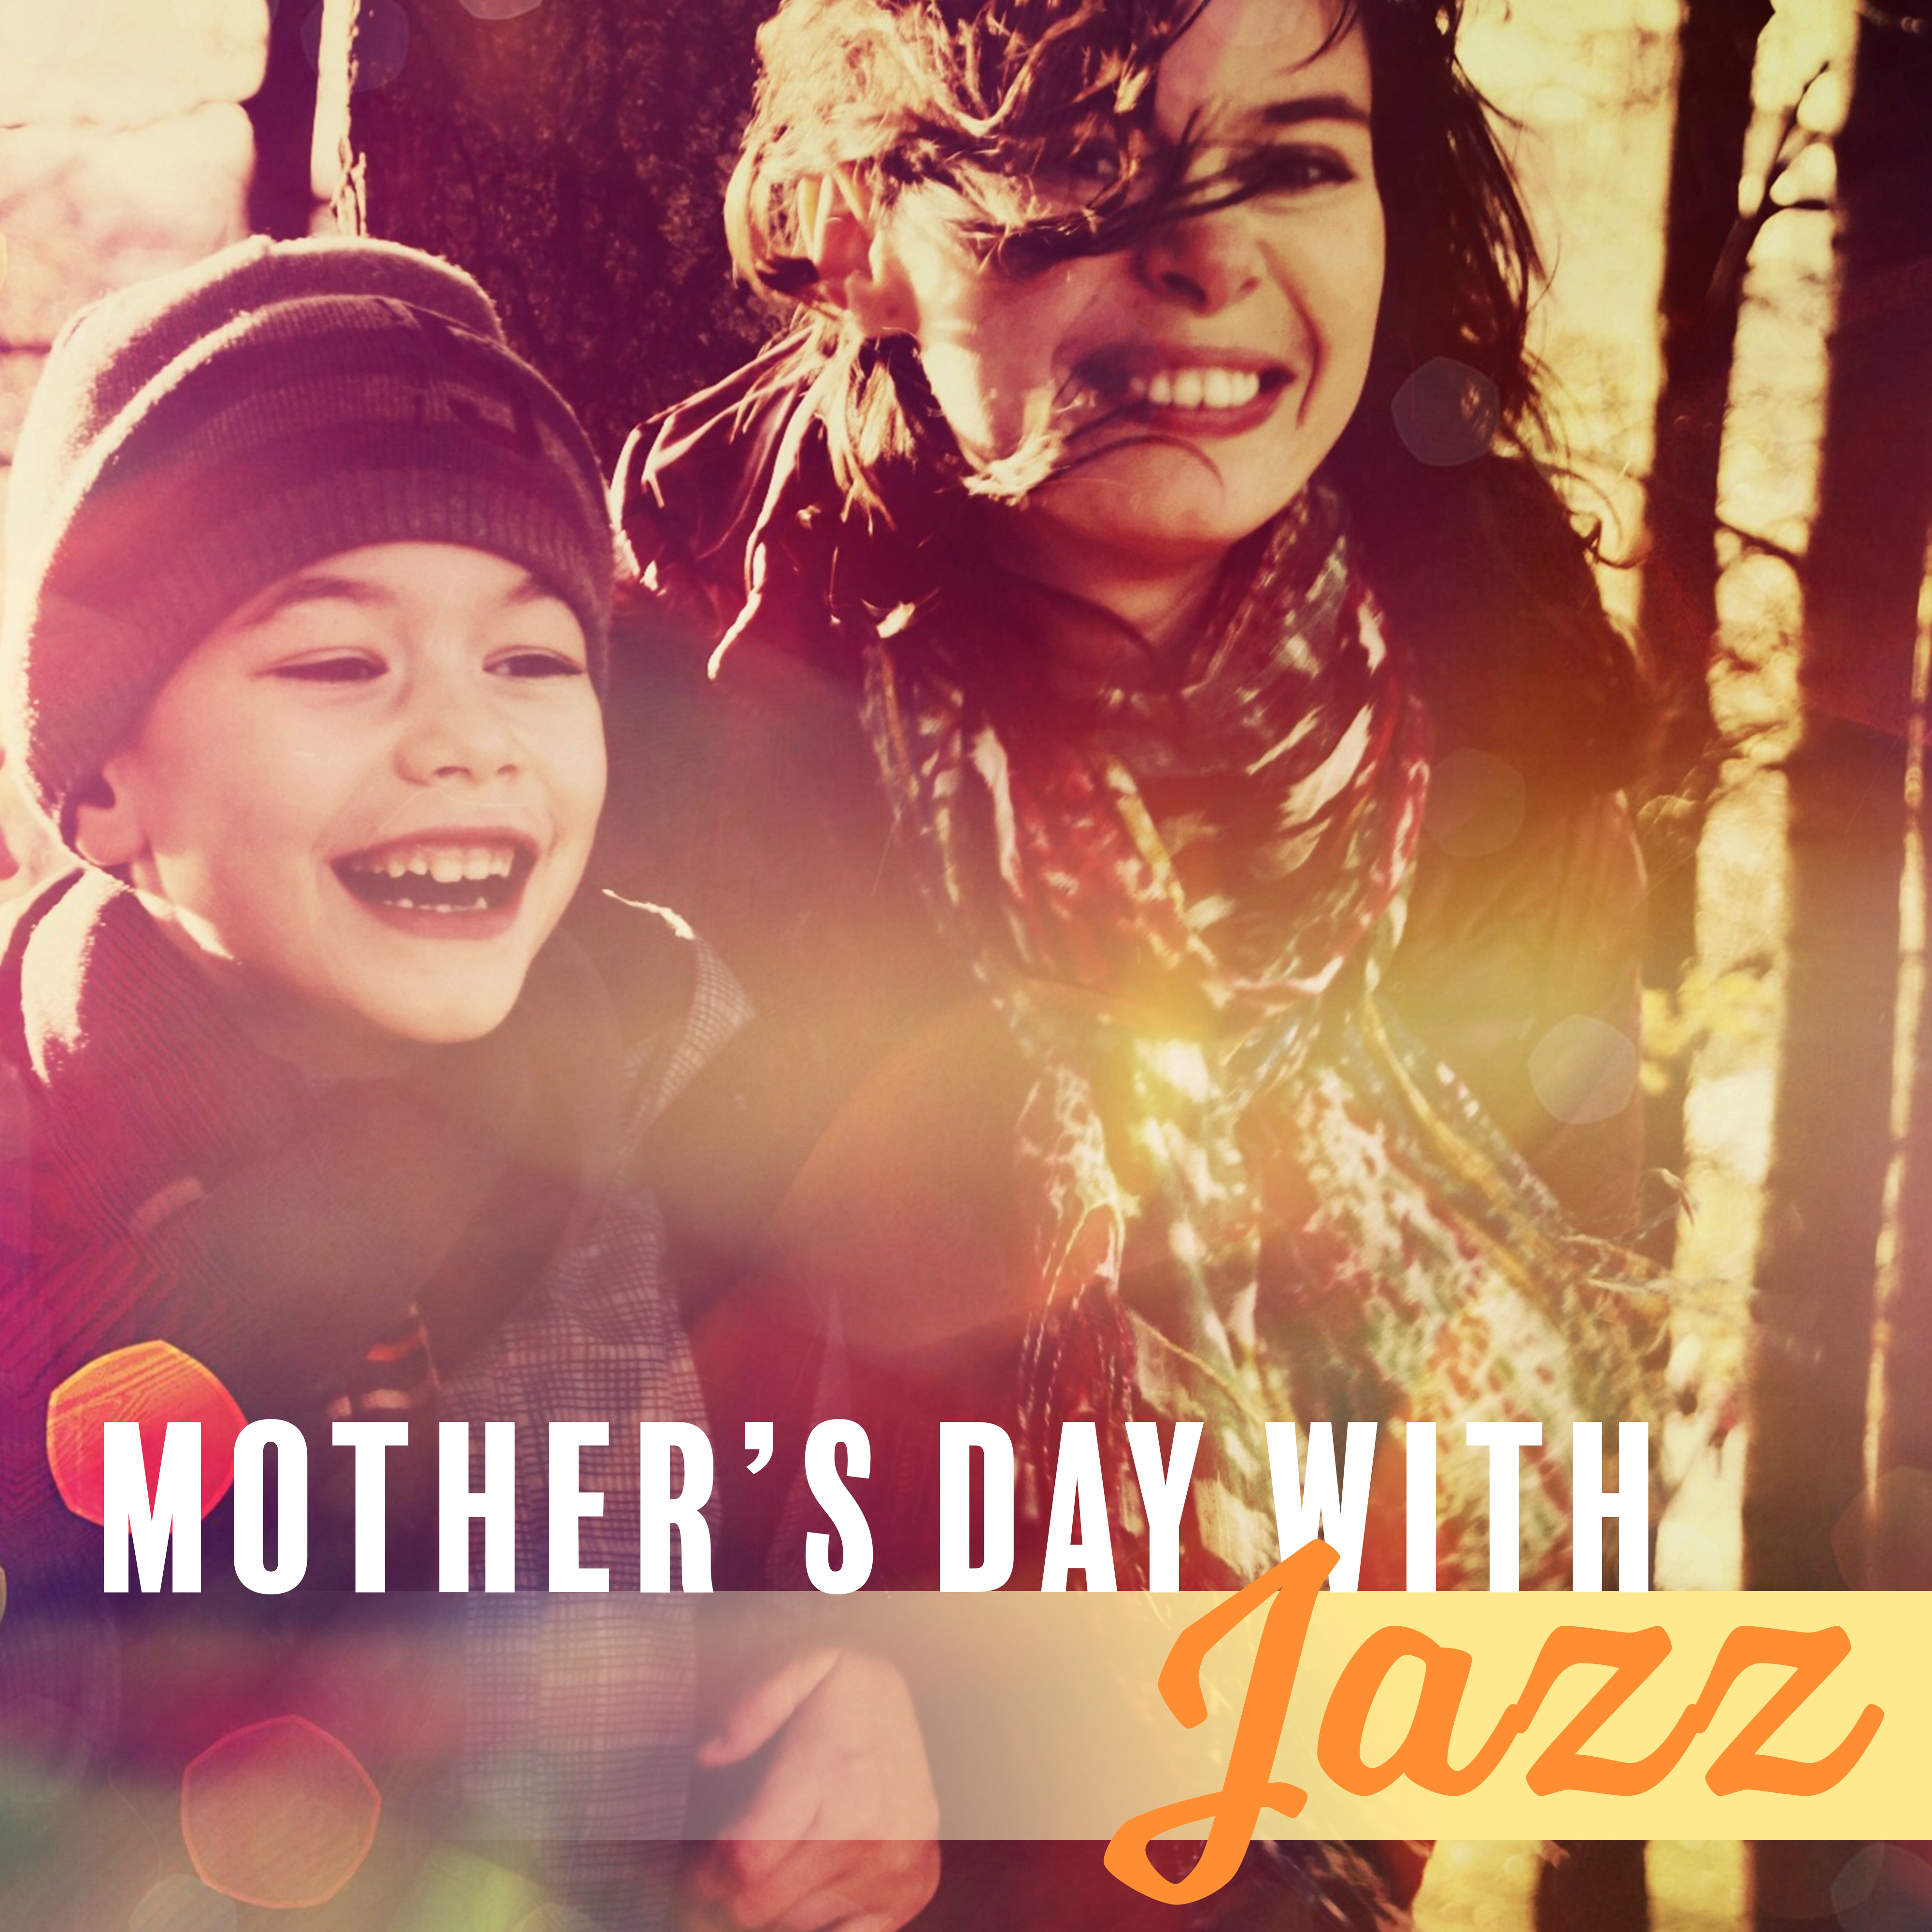 Mother' s Day with Jazz  Smooth Jazz, New Relaxing Jazz 2017, Pure Instrumental, Jazz Lounge, Piano